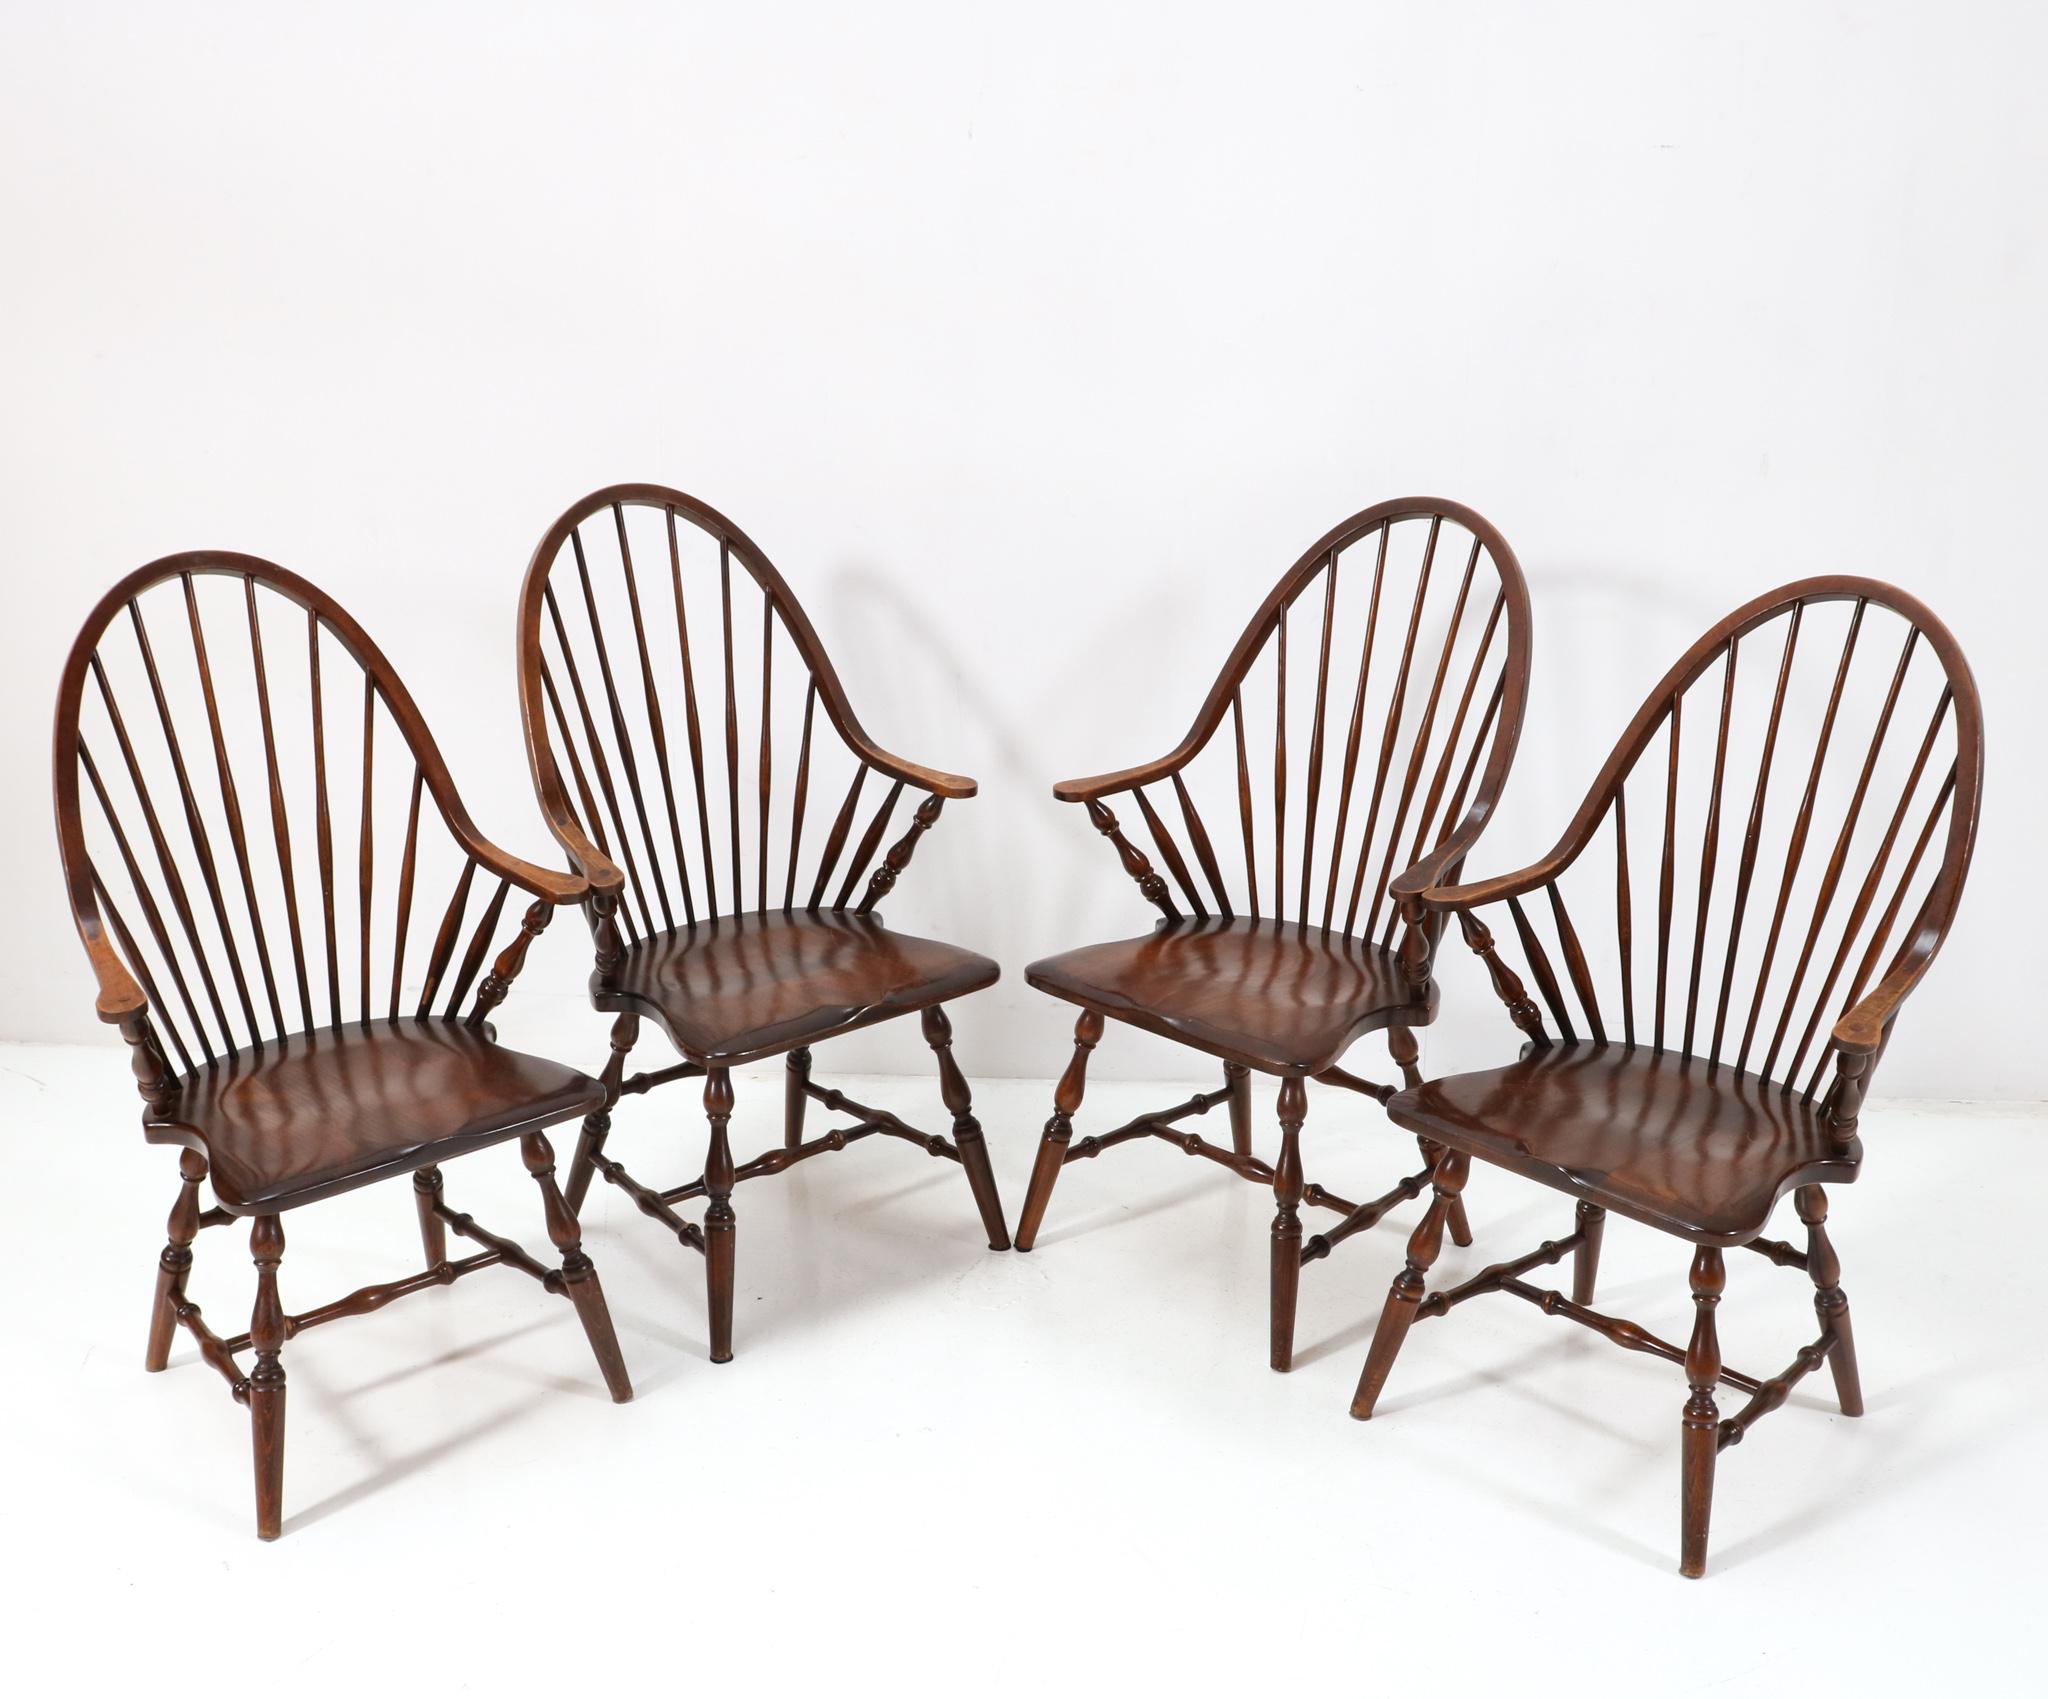 Amazing and rare set of four tall spindle back Windsor style armchairs.
Striking English design from the 1960s.
Solid stained beech frames with a warm maple/birch wood finish.
Quality construction and elegant design.
This wonderful set of four